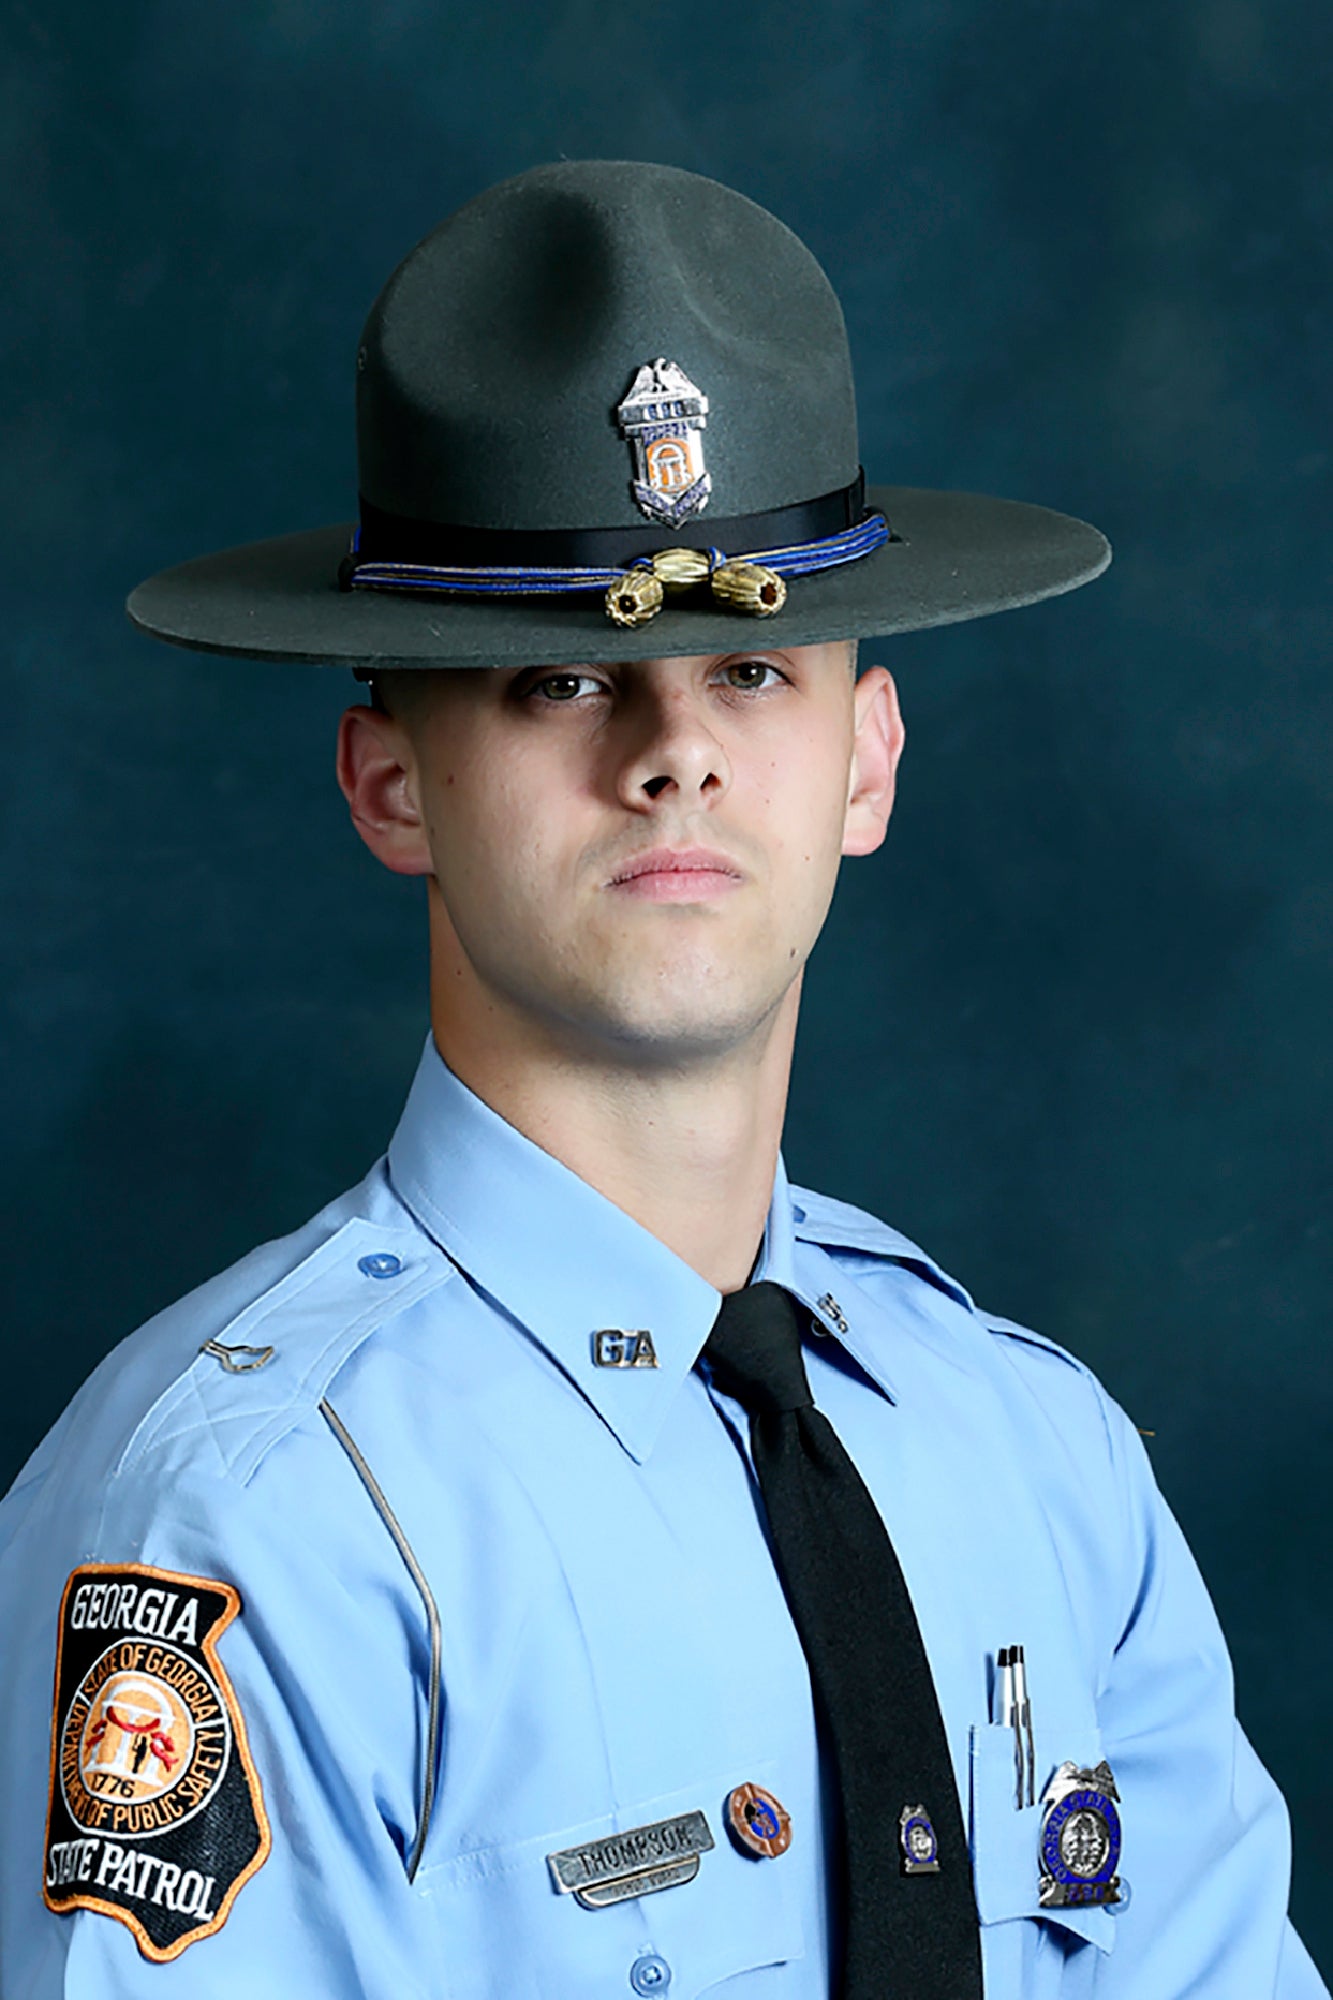 State trooper Jacob Gordon Thompson is seen in an official portrait